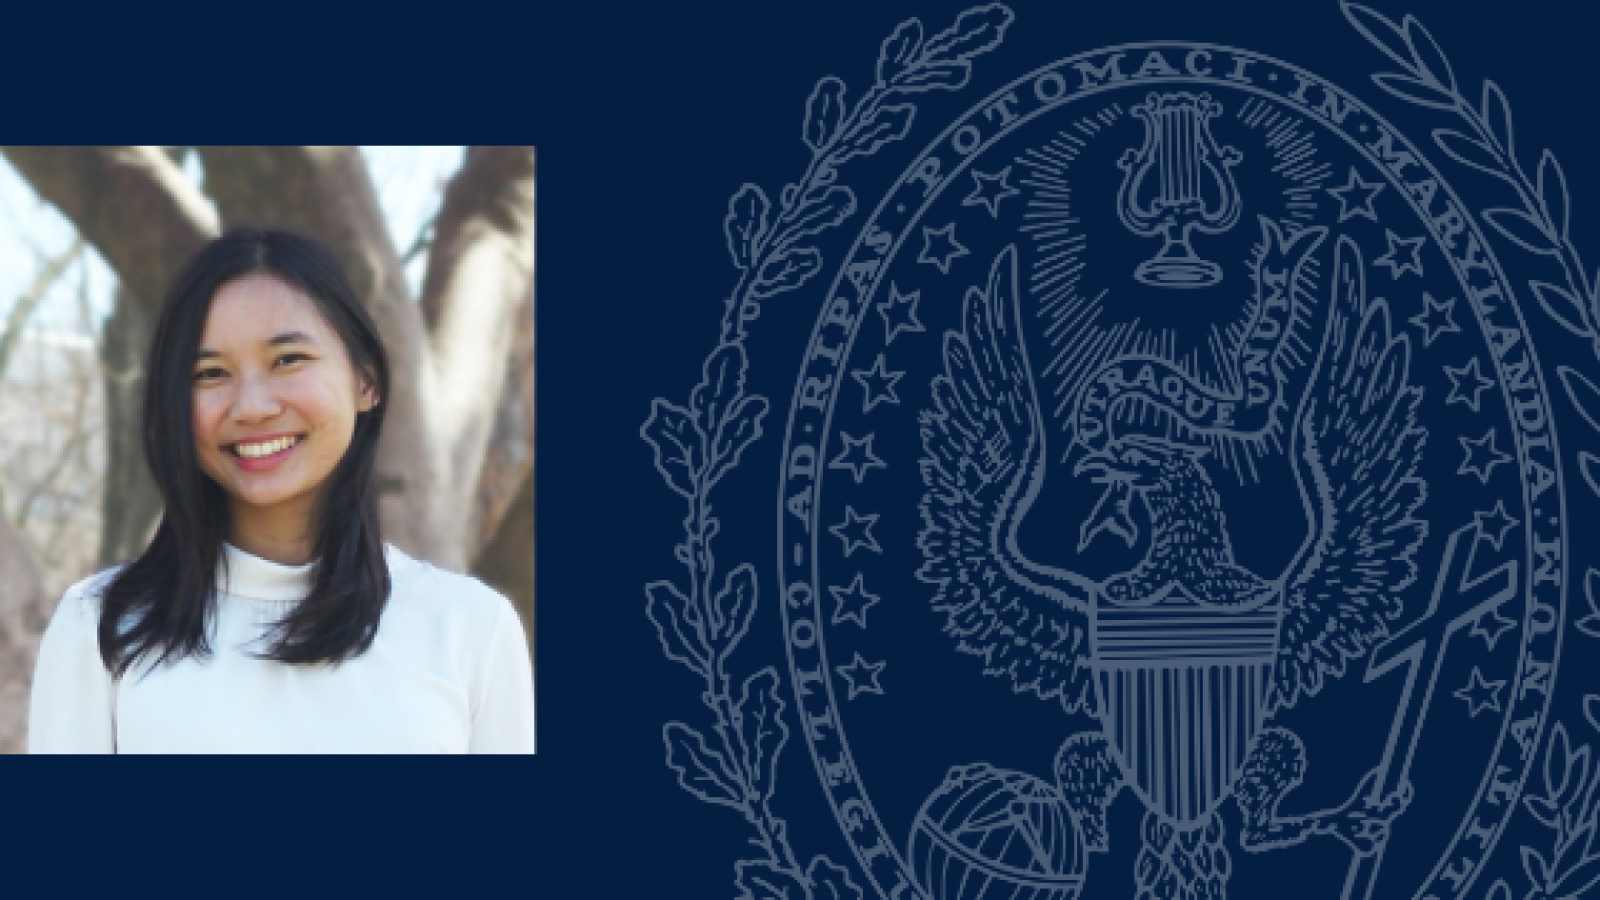 Cynthia Ng headshot overlaid on graphic with blue background and Georgetown University seal